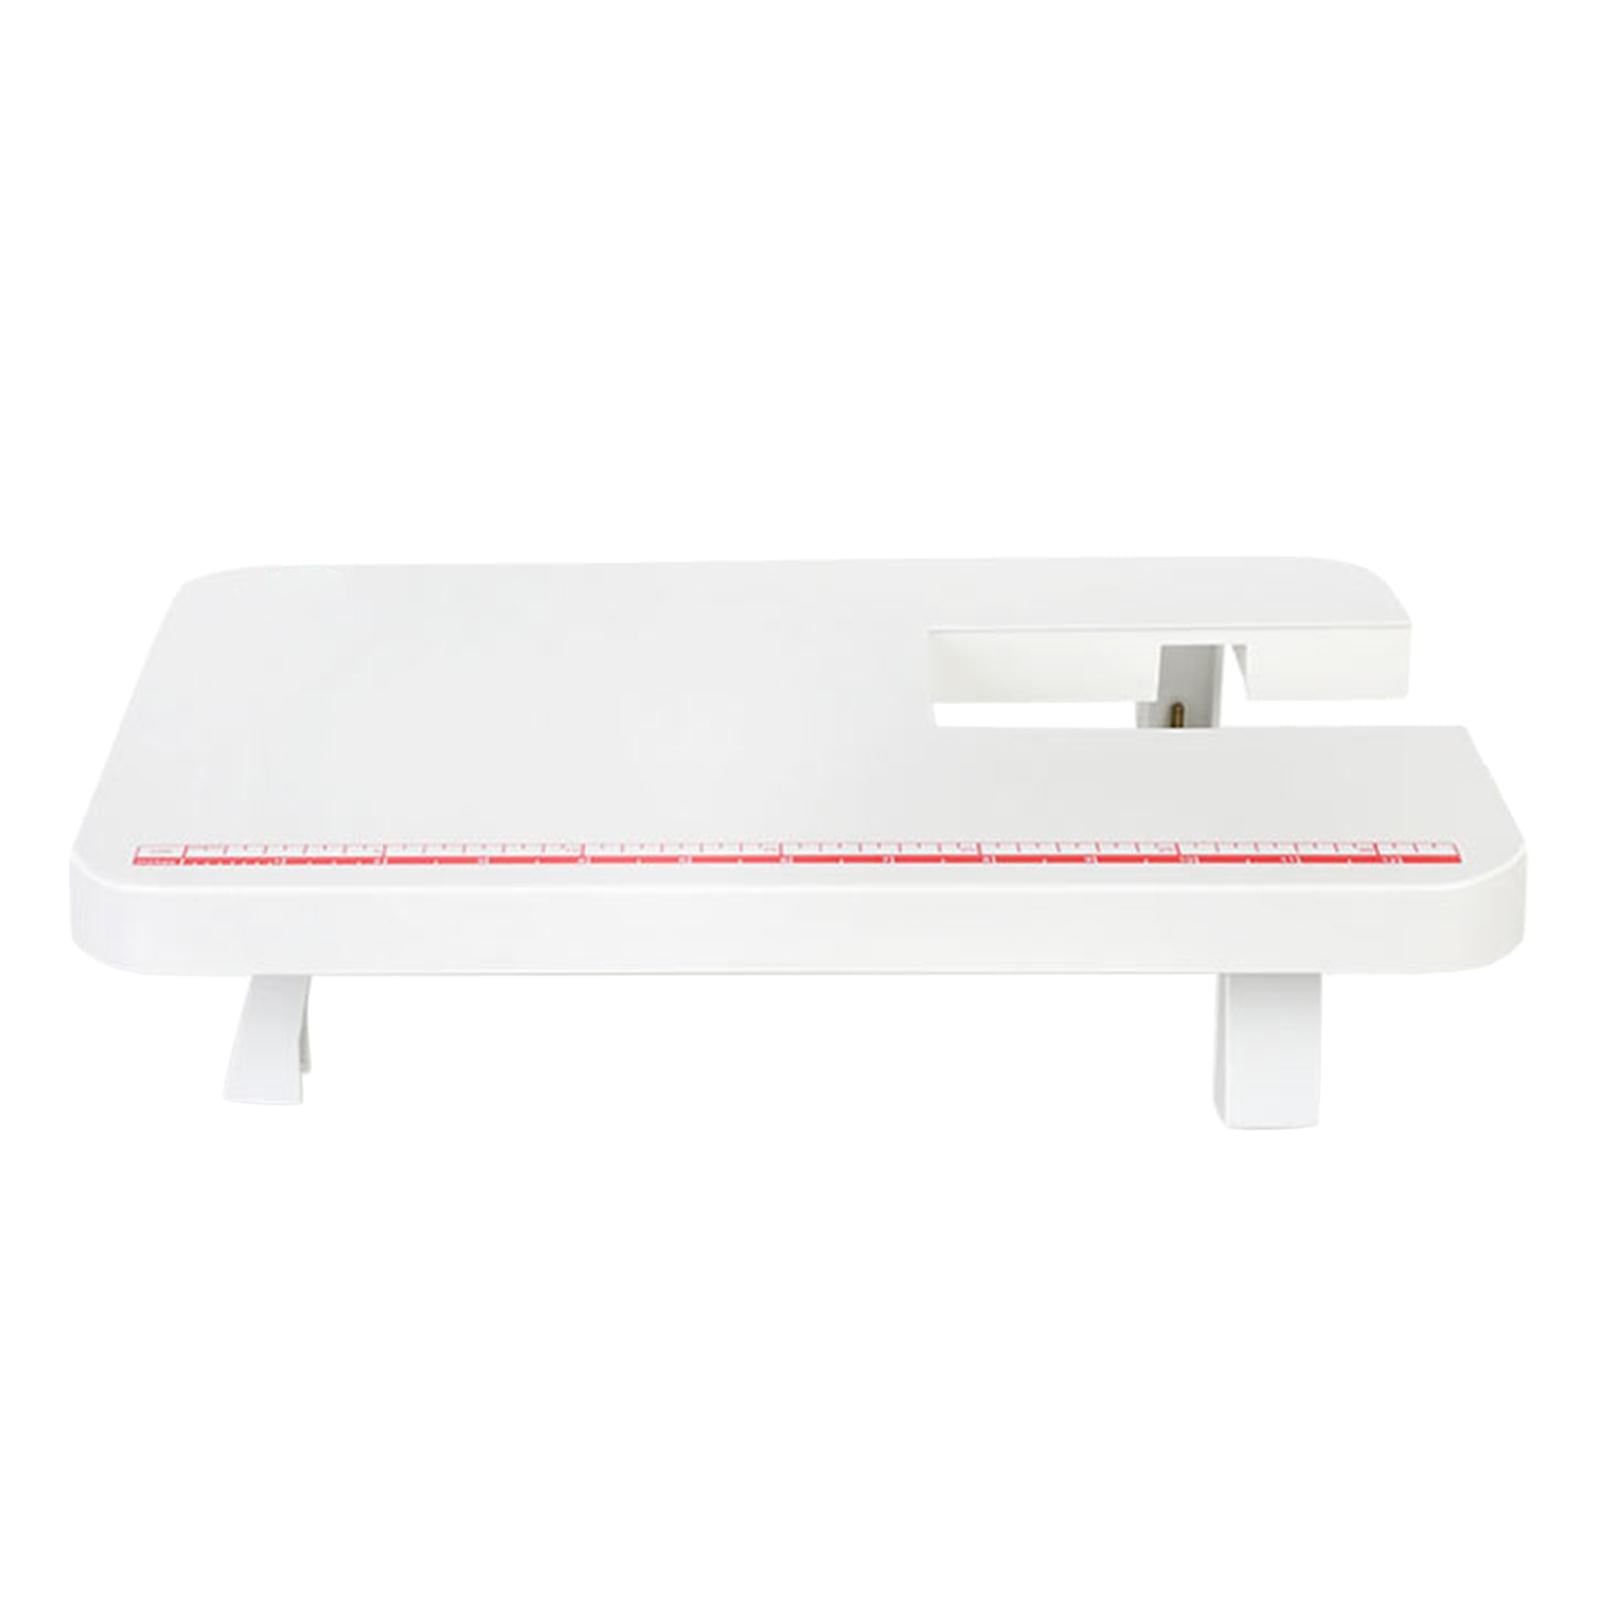 Baosity Plastic Extension Table for Household Sewing Machine Universal